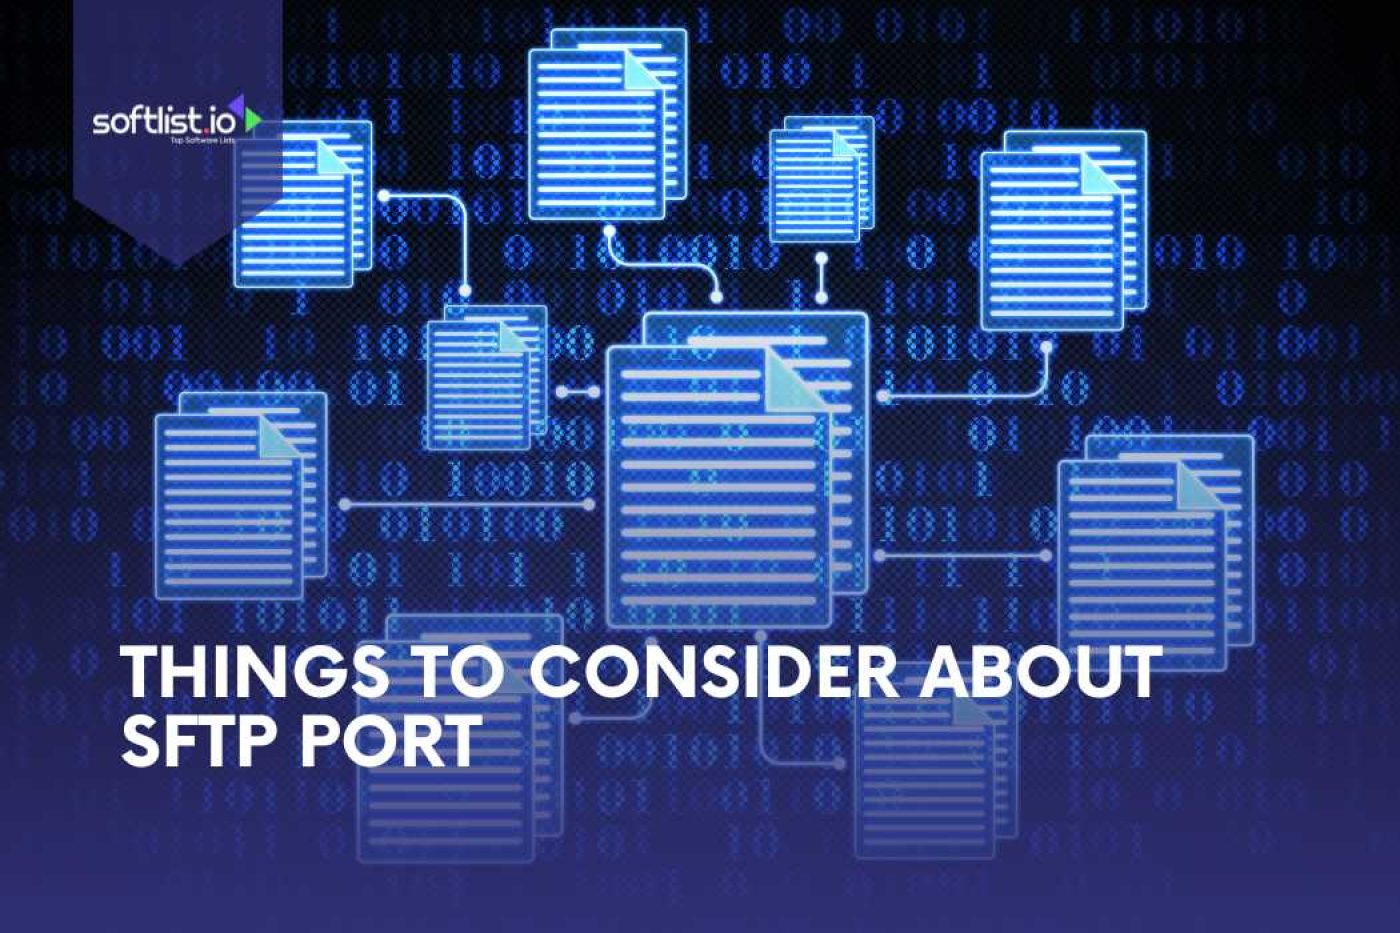 Things to Consider About SFTP Port